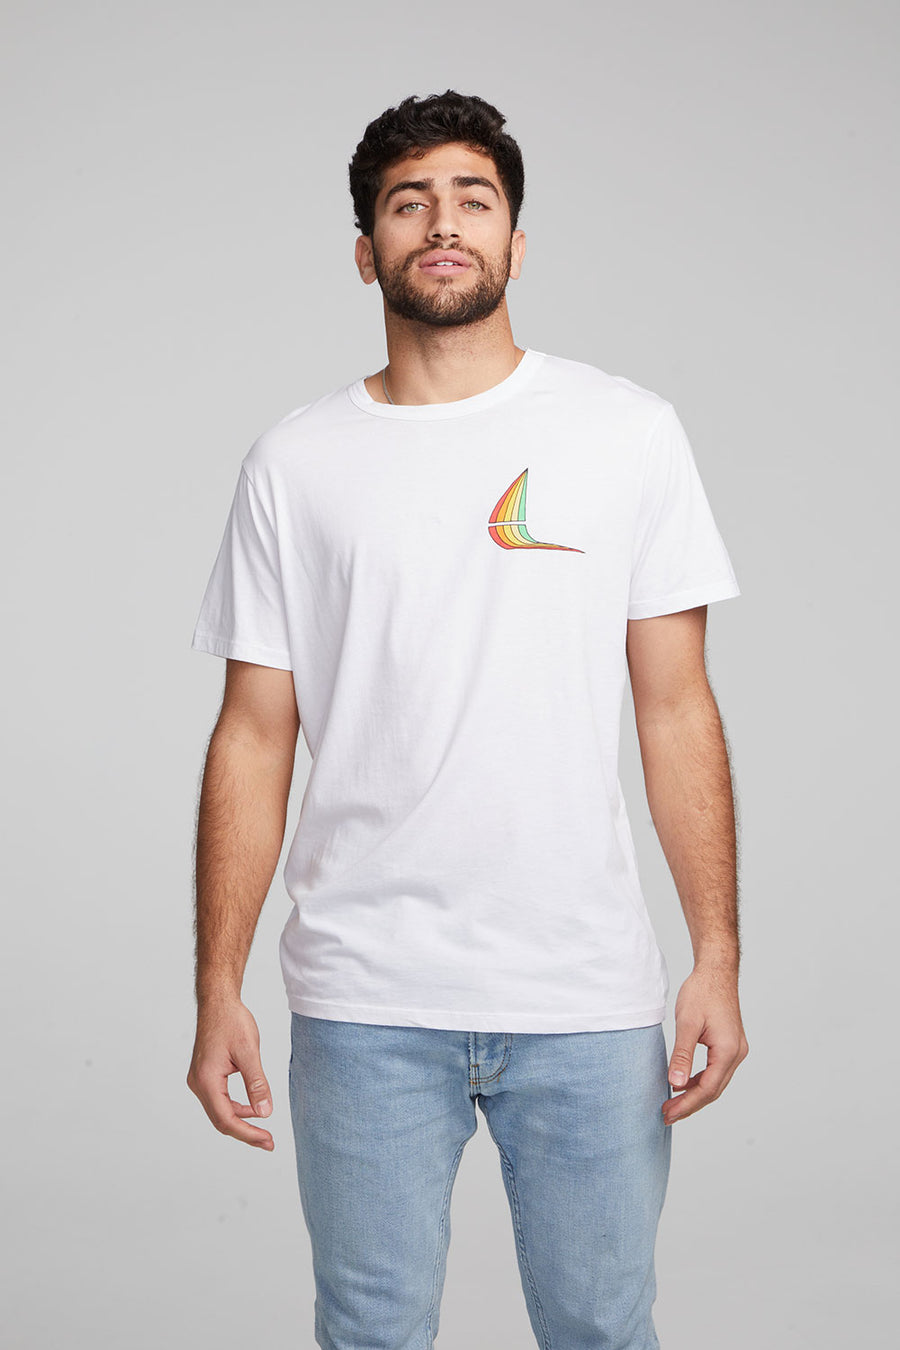 Sail Away Crew Neck Tee MENS chaserbrand